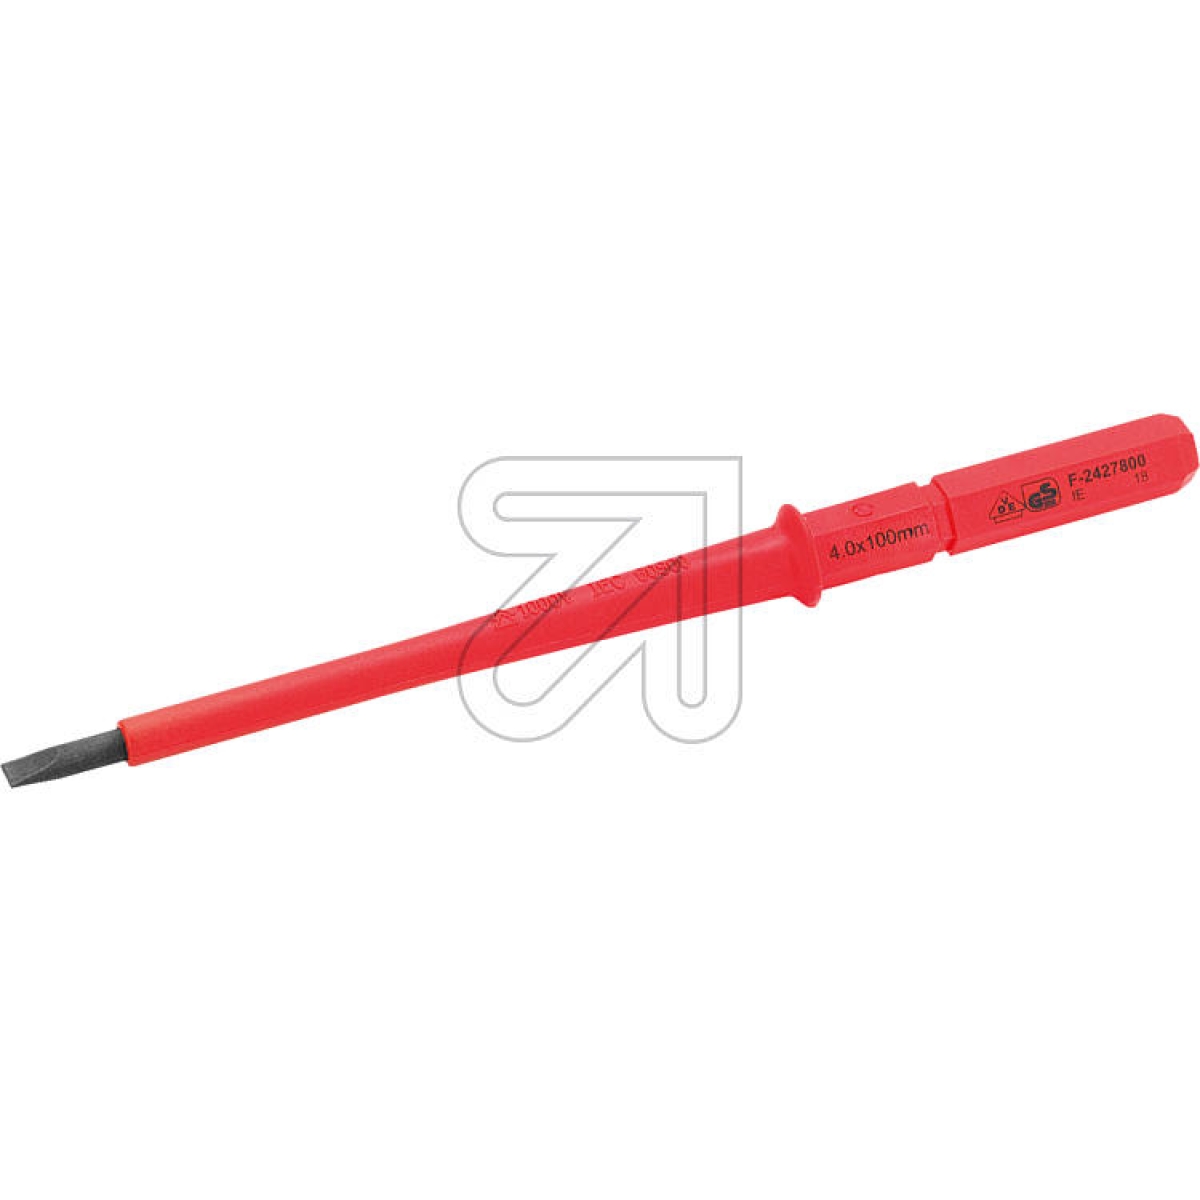 cimcoInterchangeable blades for VDE slotted torque screwdriver, 4.0x100mm